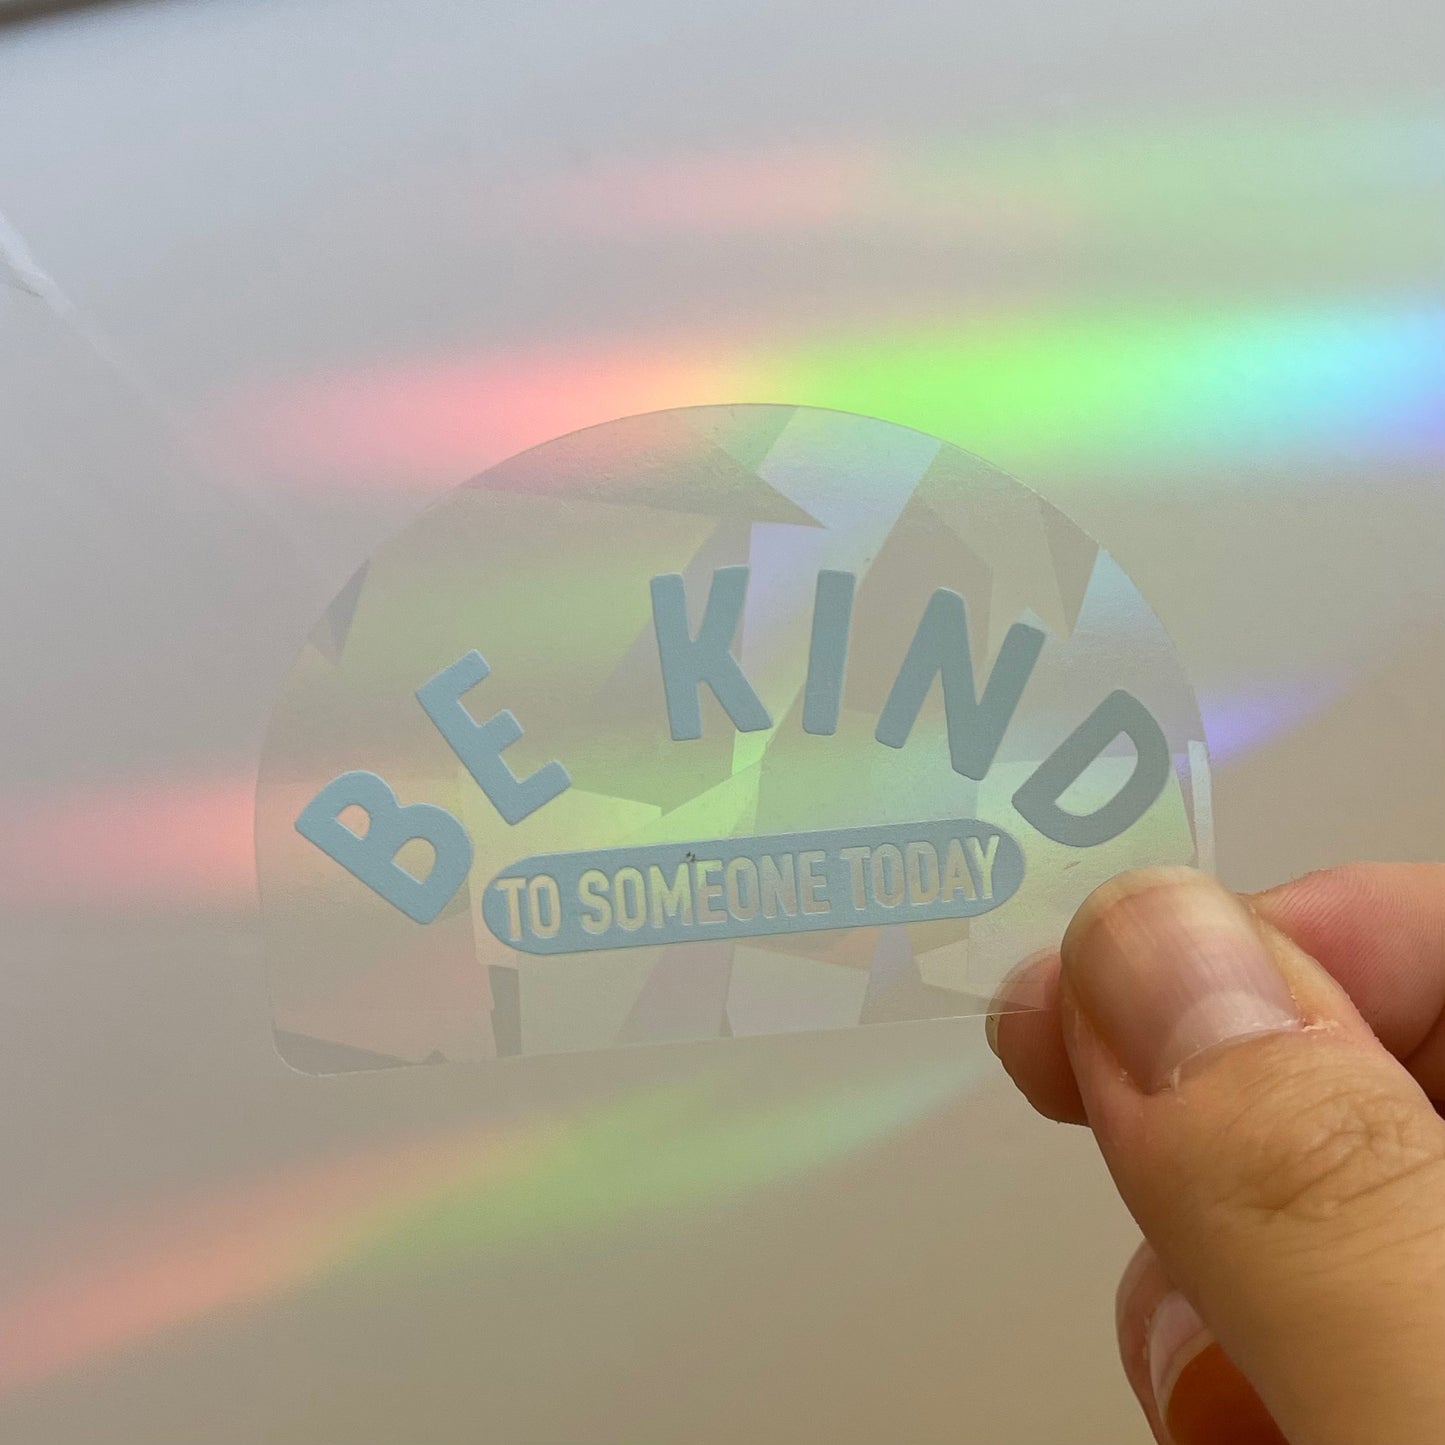 Be Kind To Someone Today - Rainbow-Making Sun Catchers